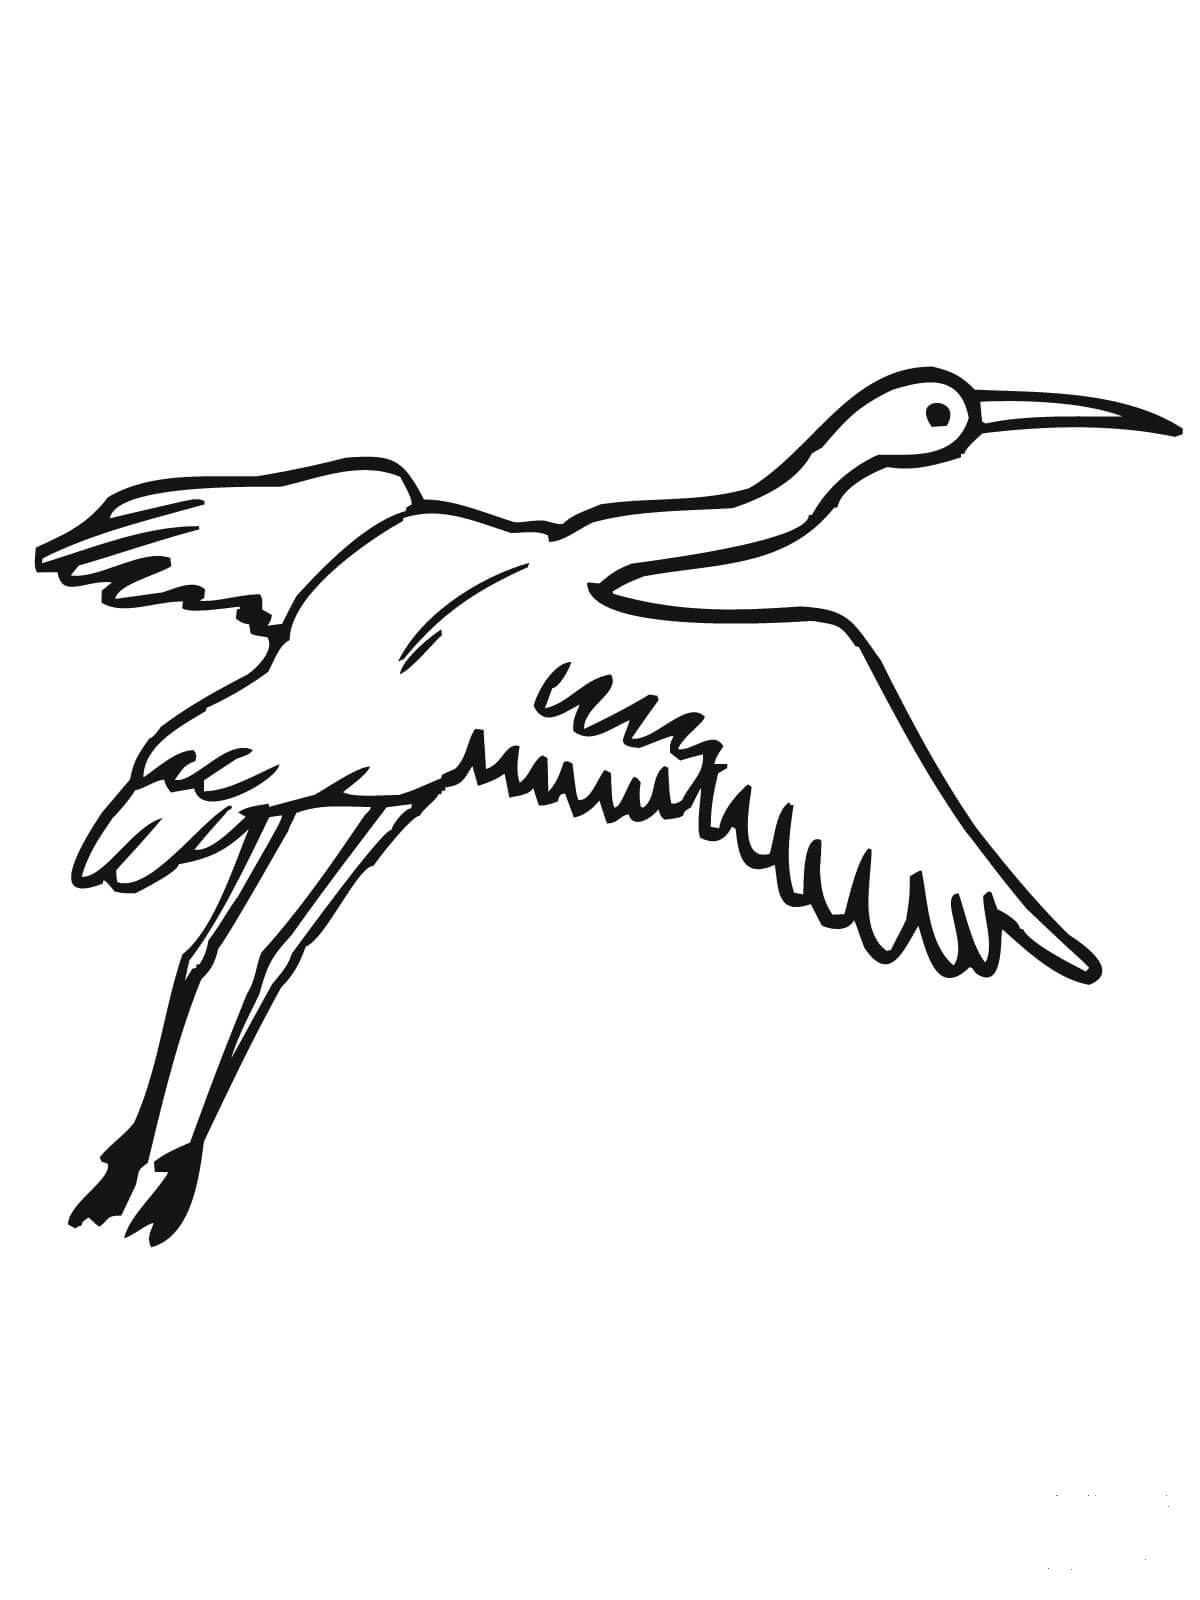 Crane with Wings Widespread coloring page - ColouringPages